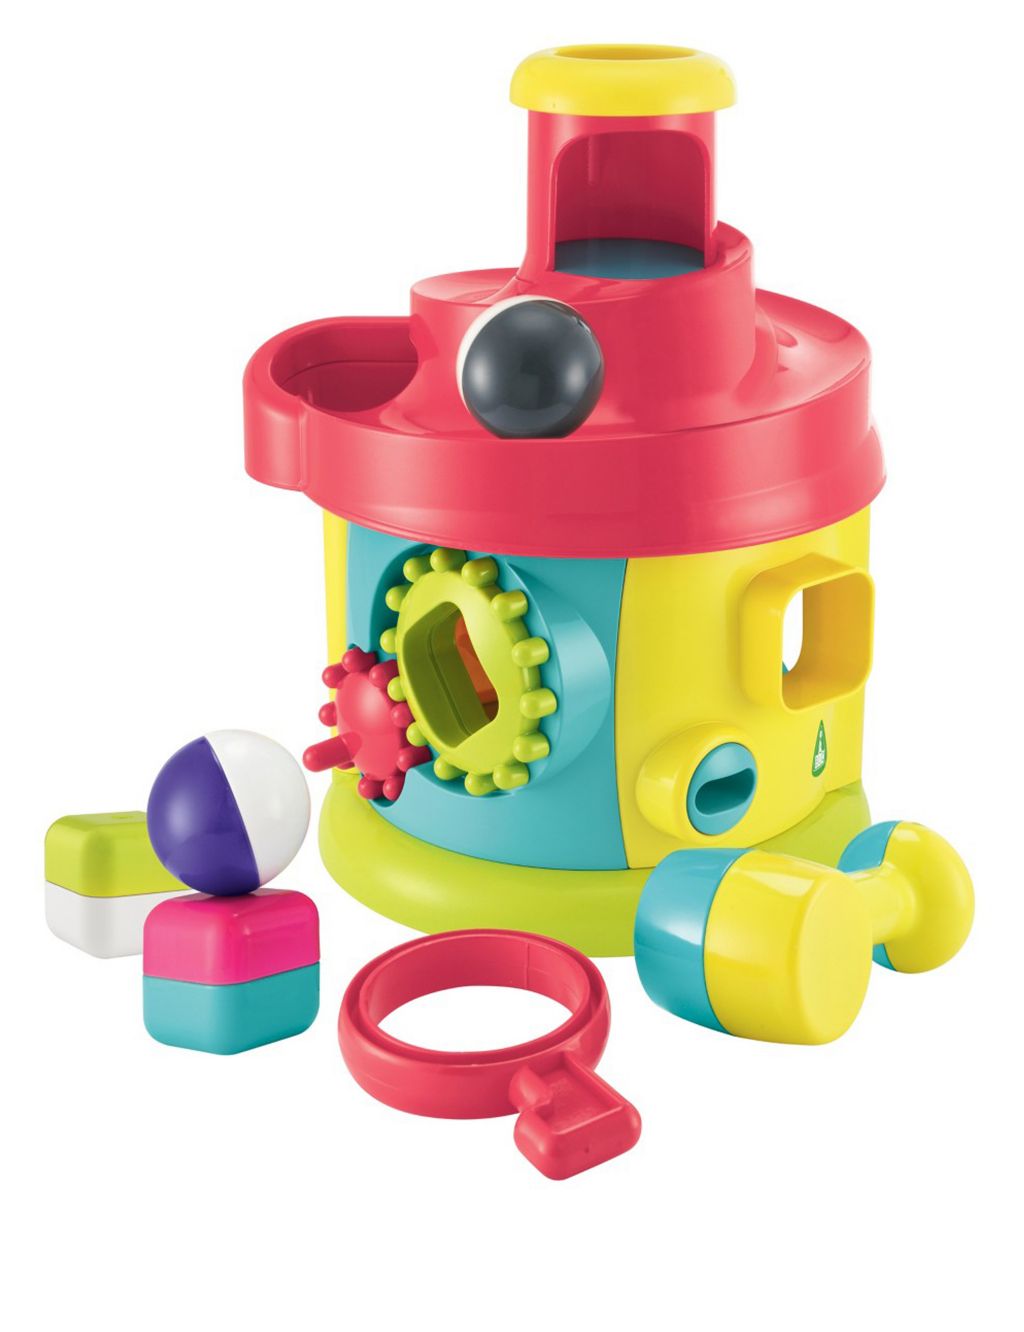 Twist and Turn Activity House (12-24 Mths) image 1